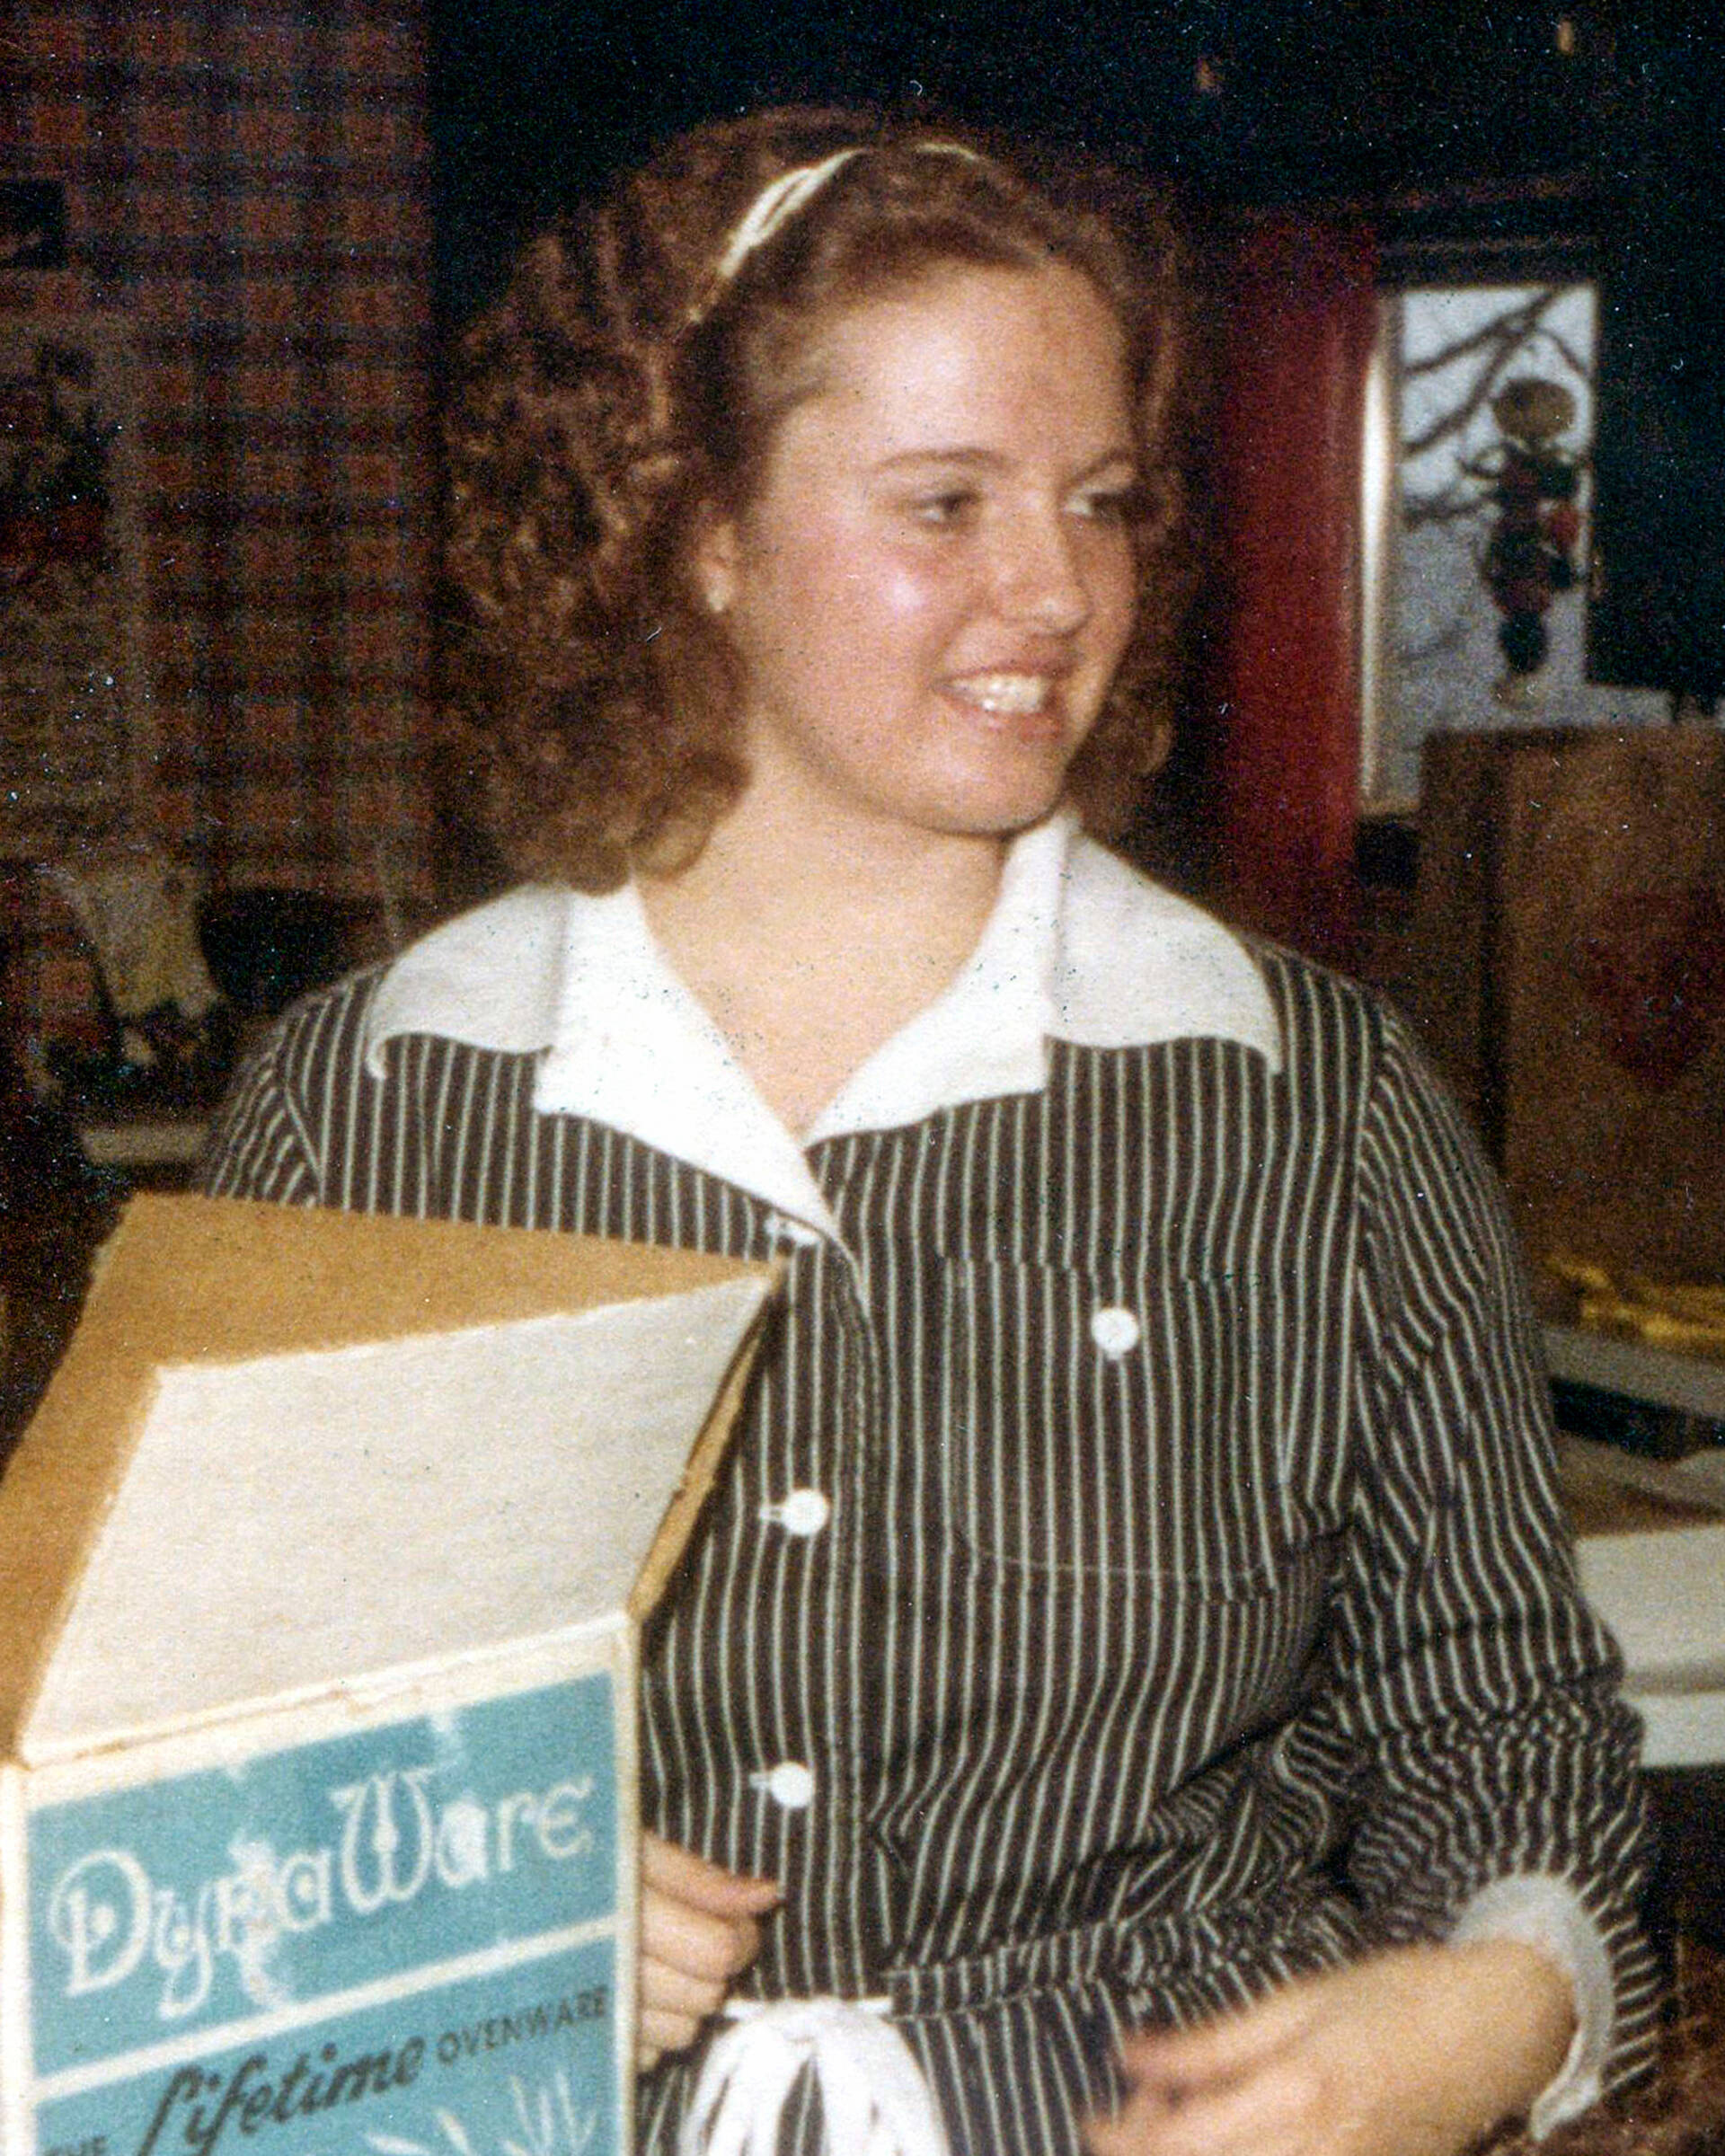 Courtesy Photo
This photo shows Robin Pelkey just before her 18th birthday, according to the Alaska Department of Public Safety. Pelkey was recently identified as a victim of convicted serial killer Robert Hansen.